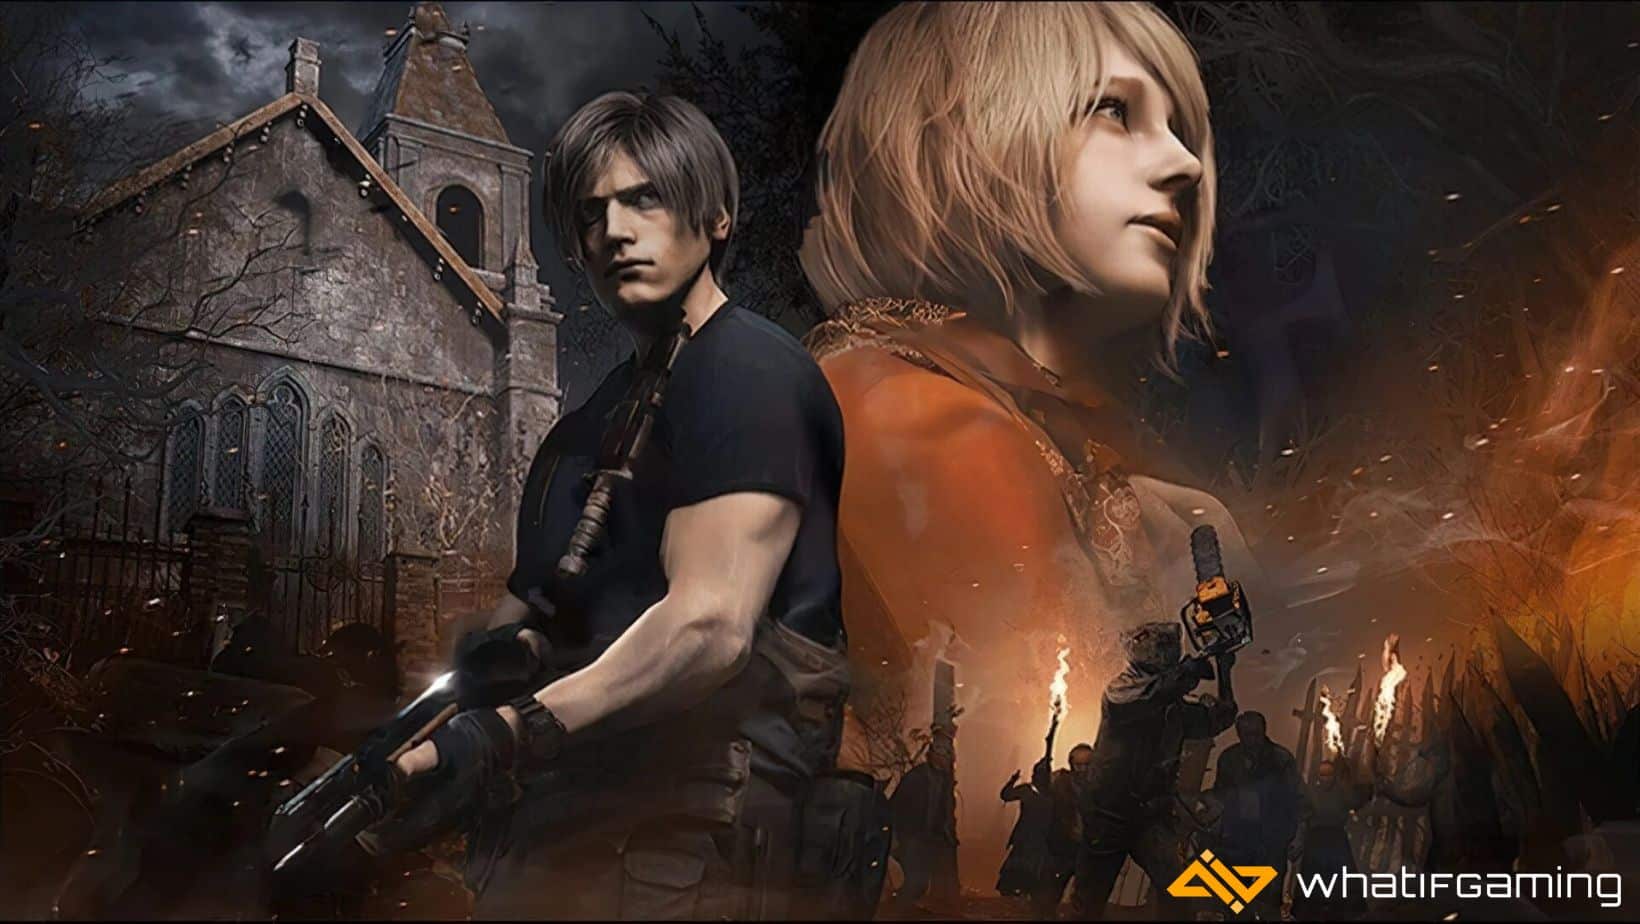 Capcom has been on a roll ever since Resident Evil 7 and thankfully, the same can be said about the Resident Evil 4 remake.